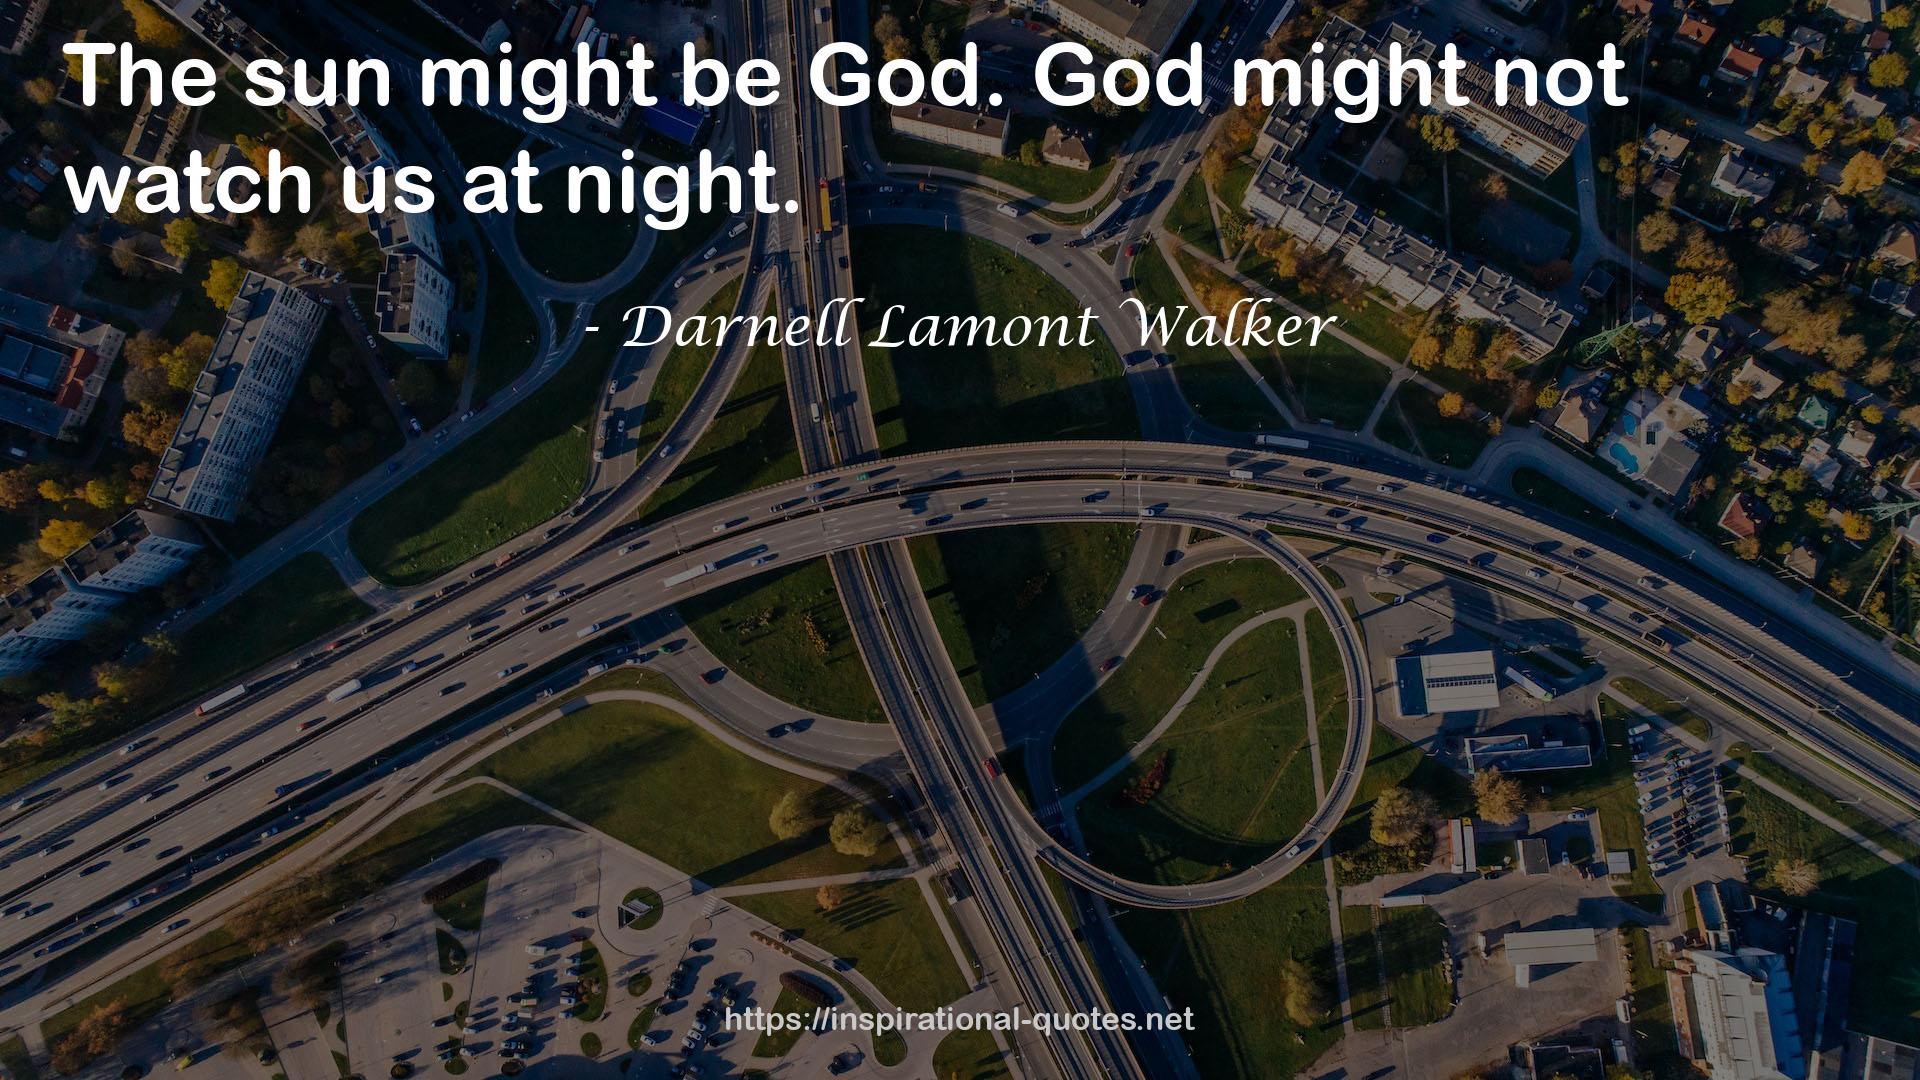 Darnell Lamont Walker QUOTES